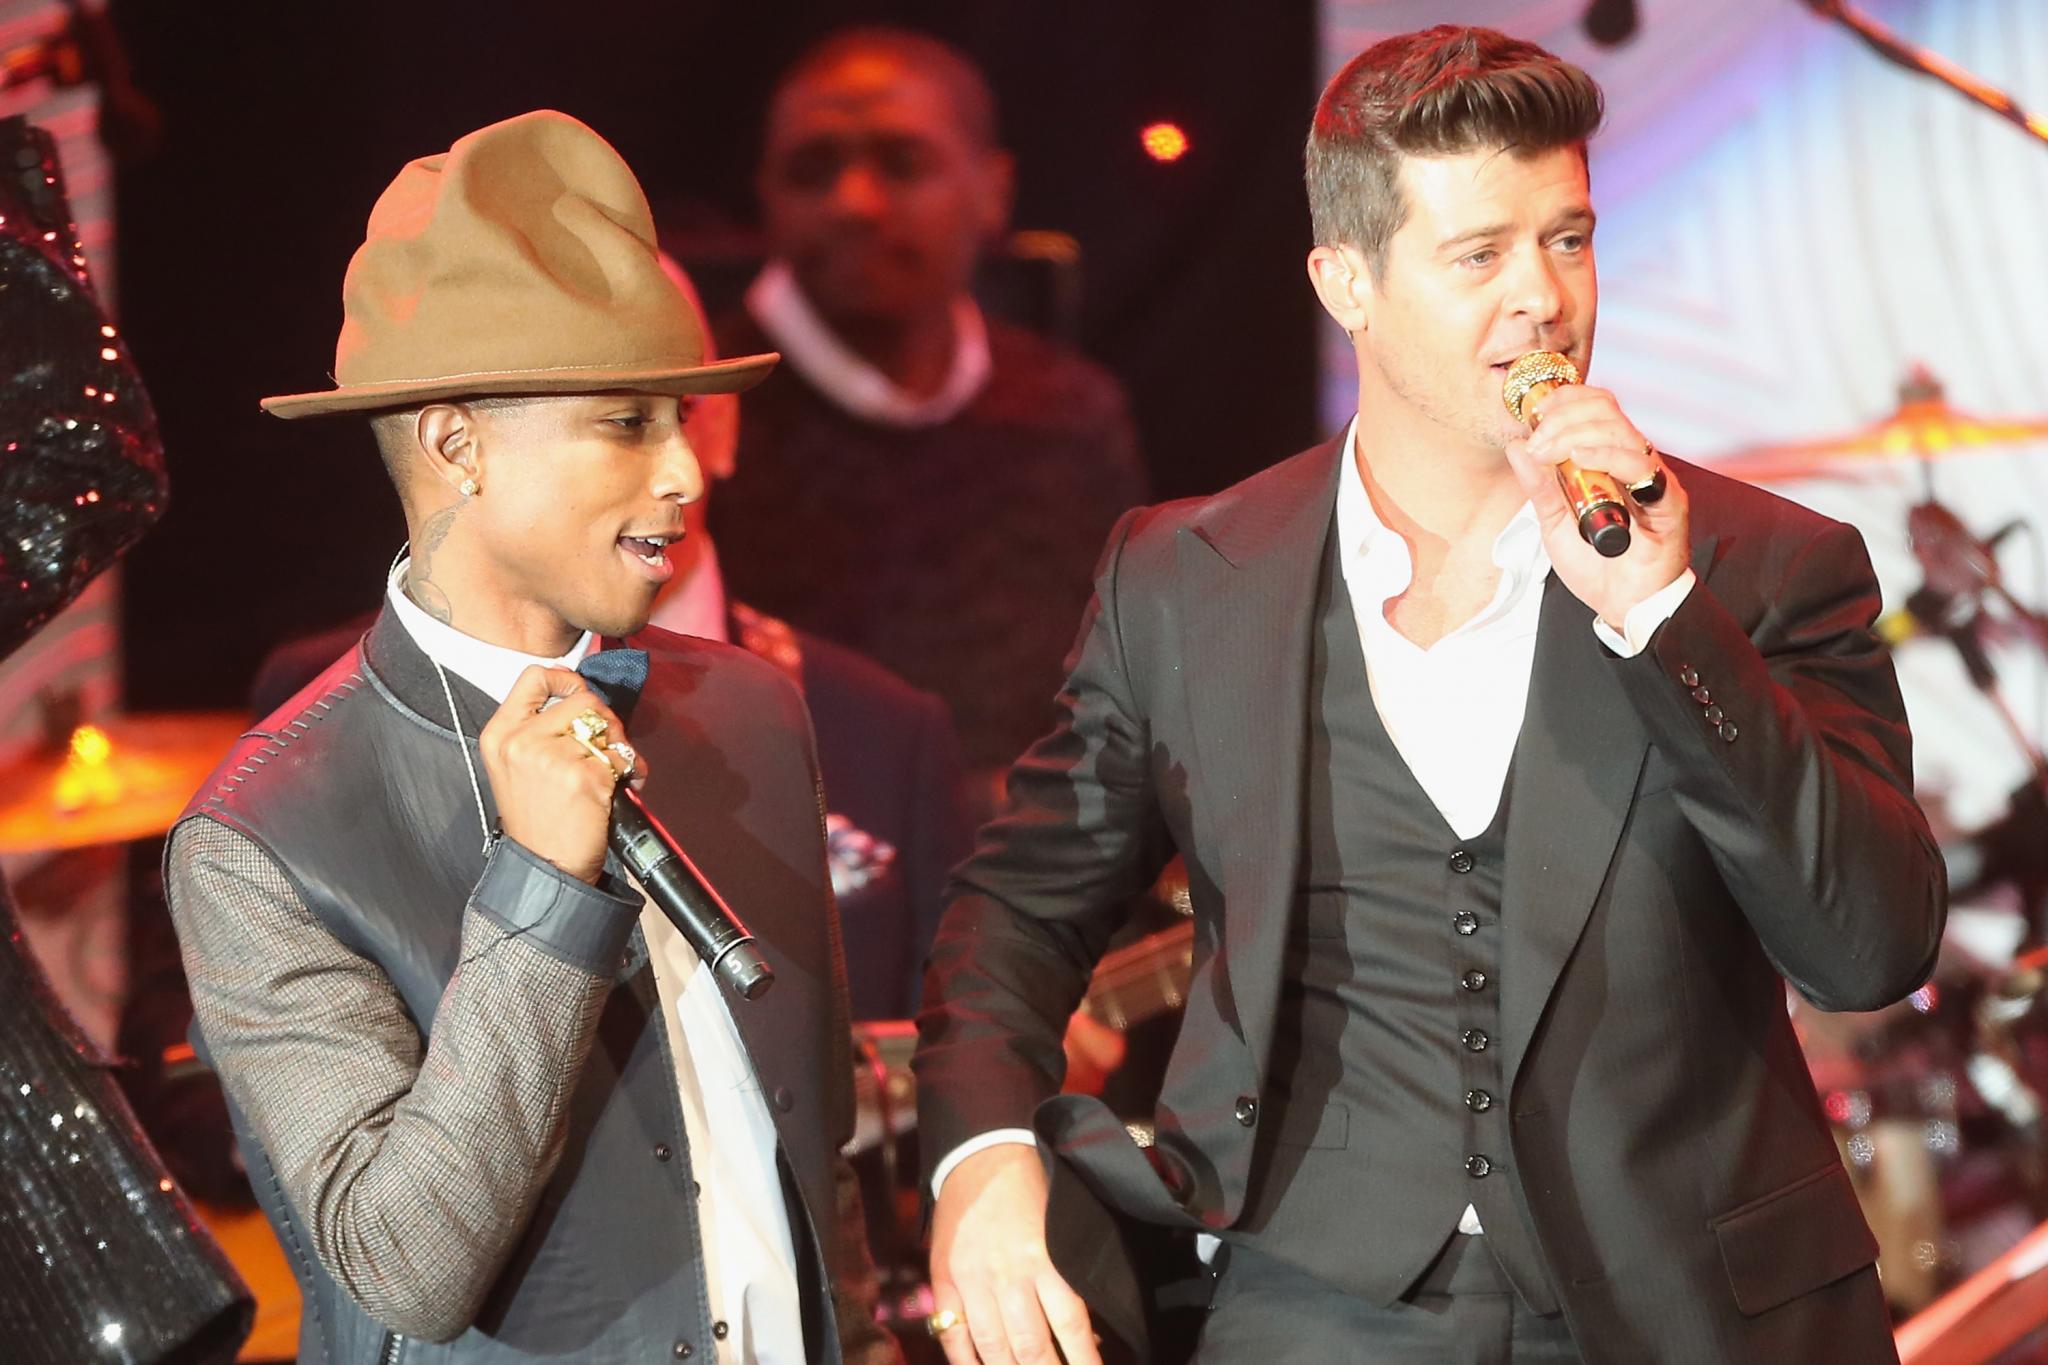 Marvin Gaye's Ex-Wife on 'Blurred Lines' Lawsuit: 'I'm Here to Protect What Marvin Left'